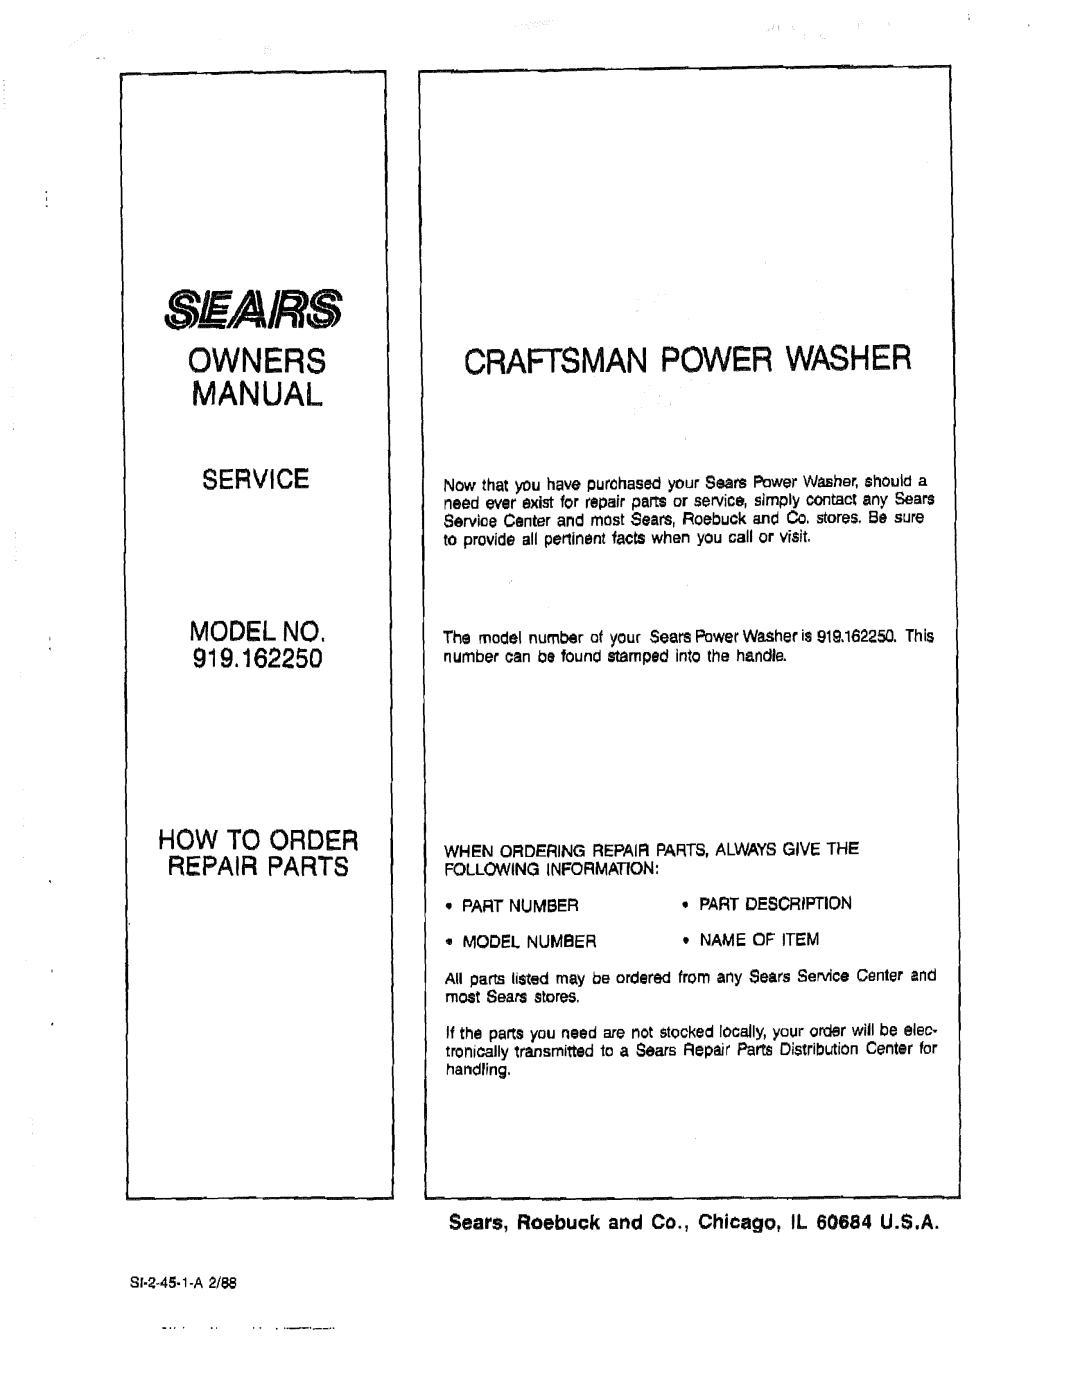 Sears 919.16225 Owners, Craftsman Power Washer, Manual, SERVICE MODEL NO, 919,162250, How To Order Repair Parts, Seairs 